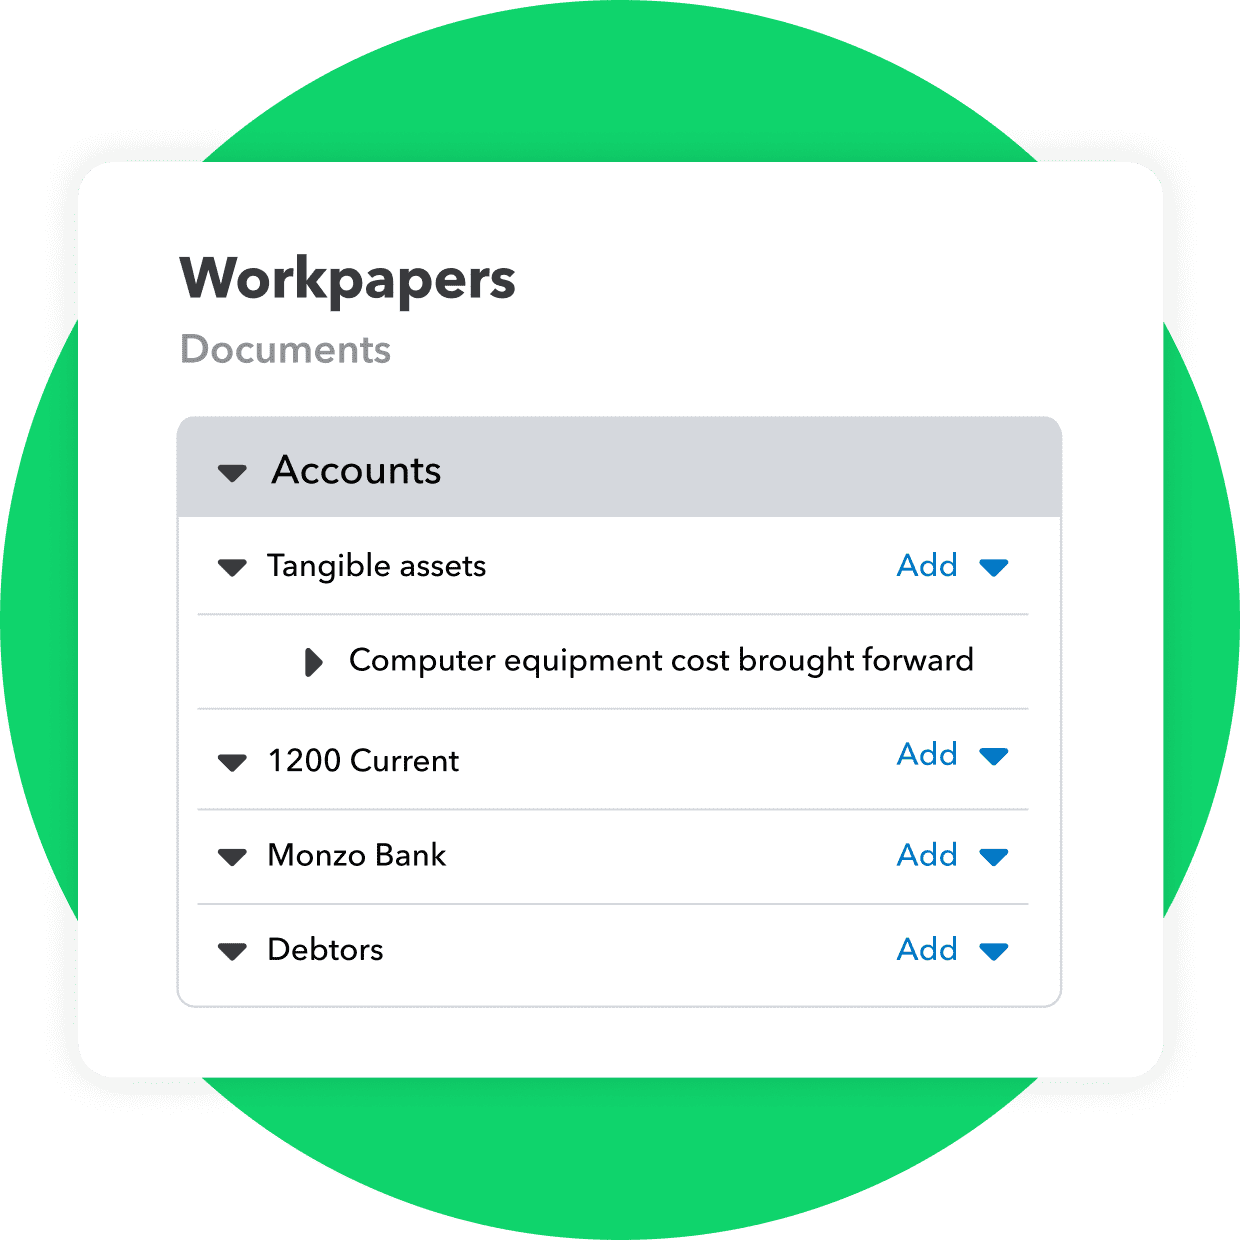 Your client documents all in one place